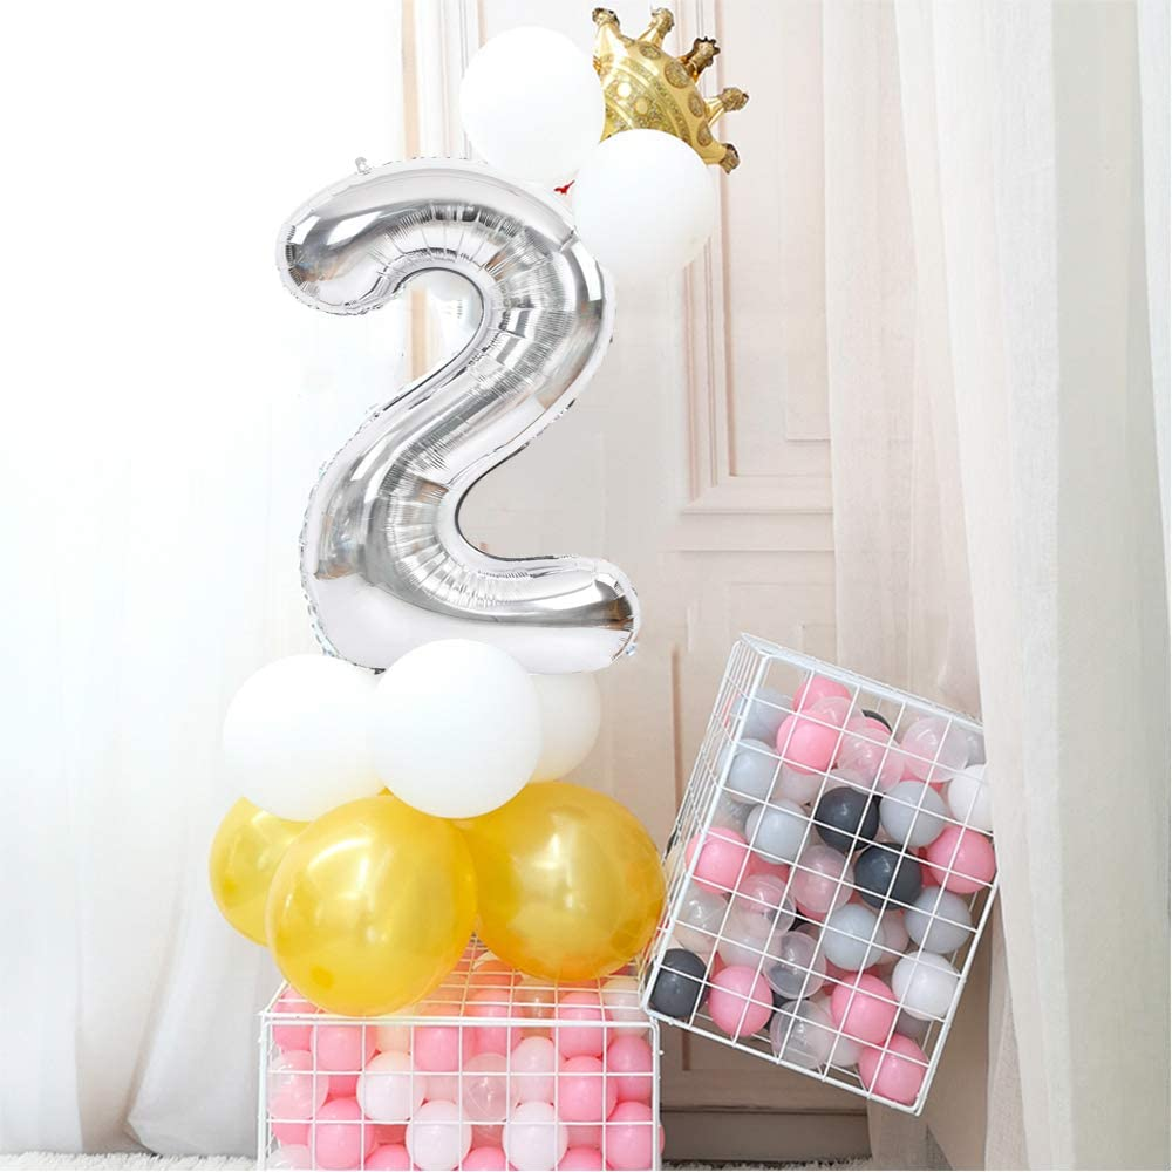 Party Decoration Balloon - 32 Inch Silver #2